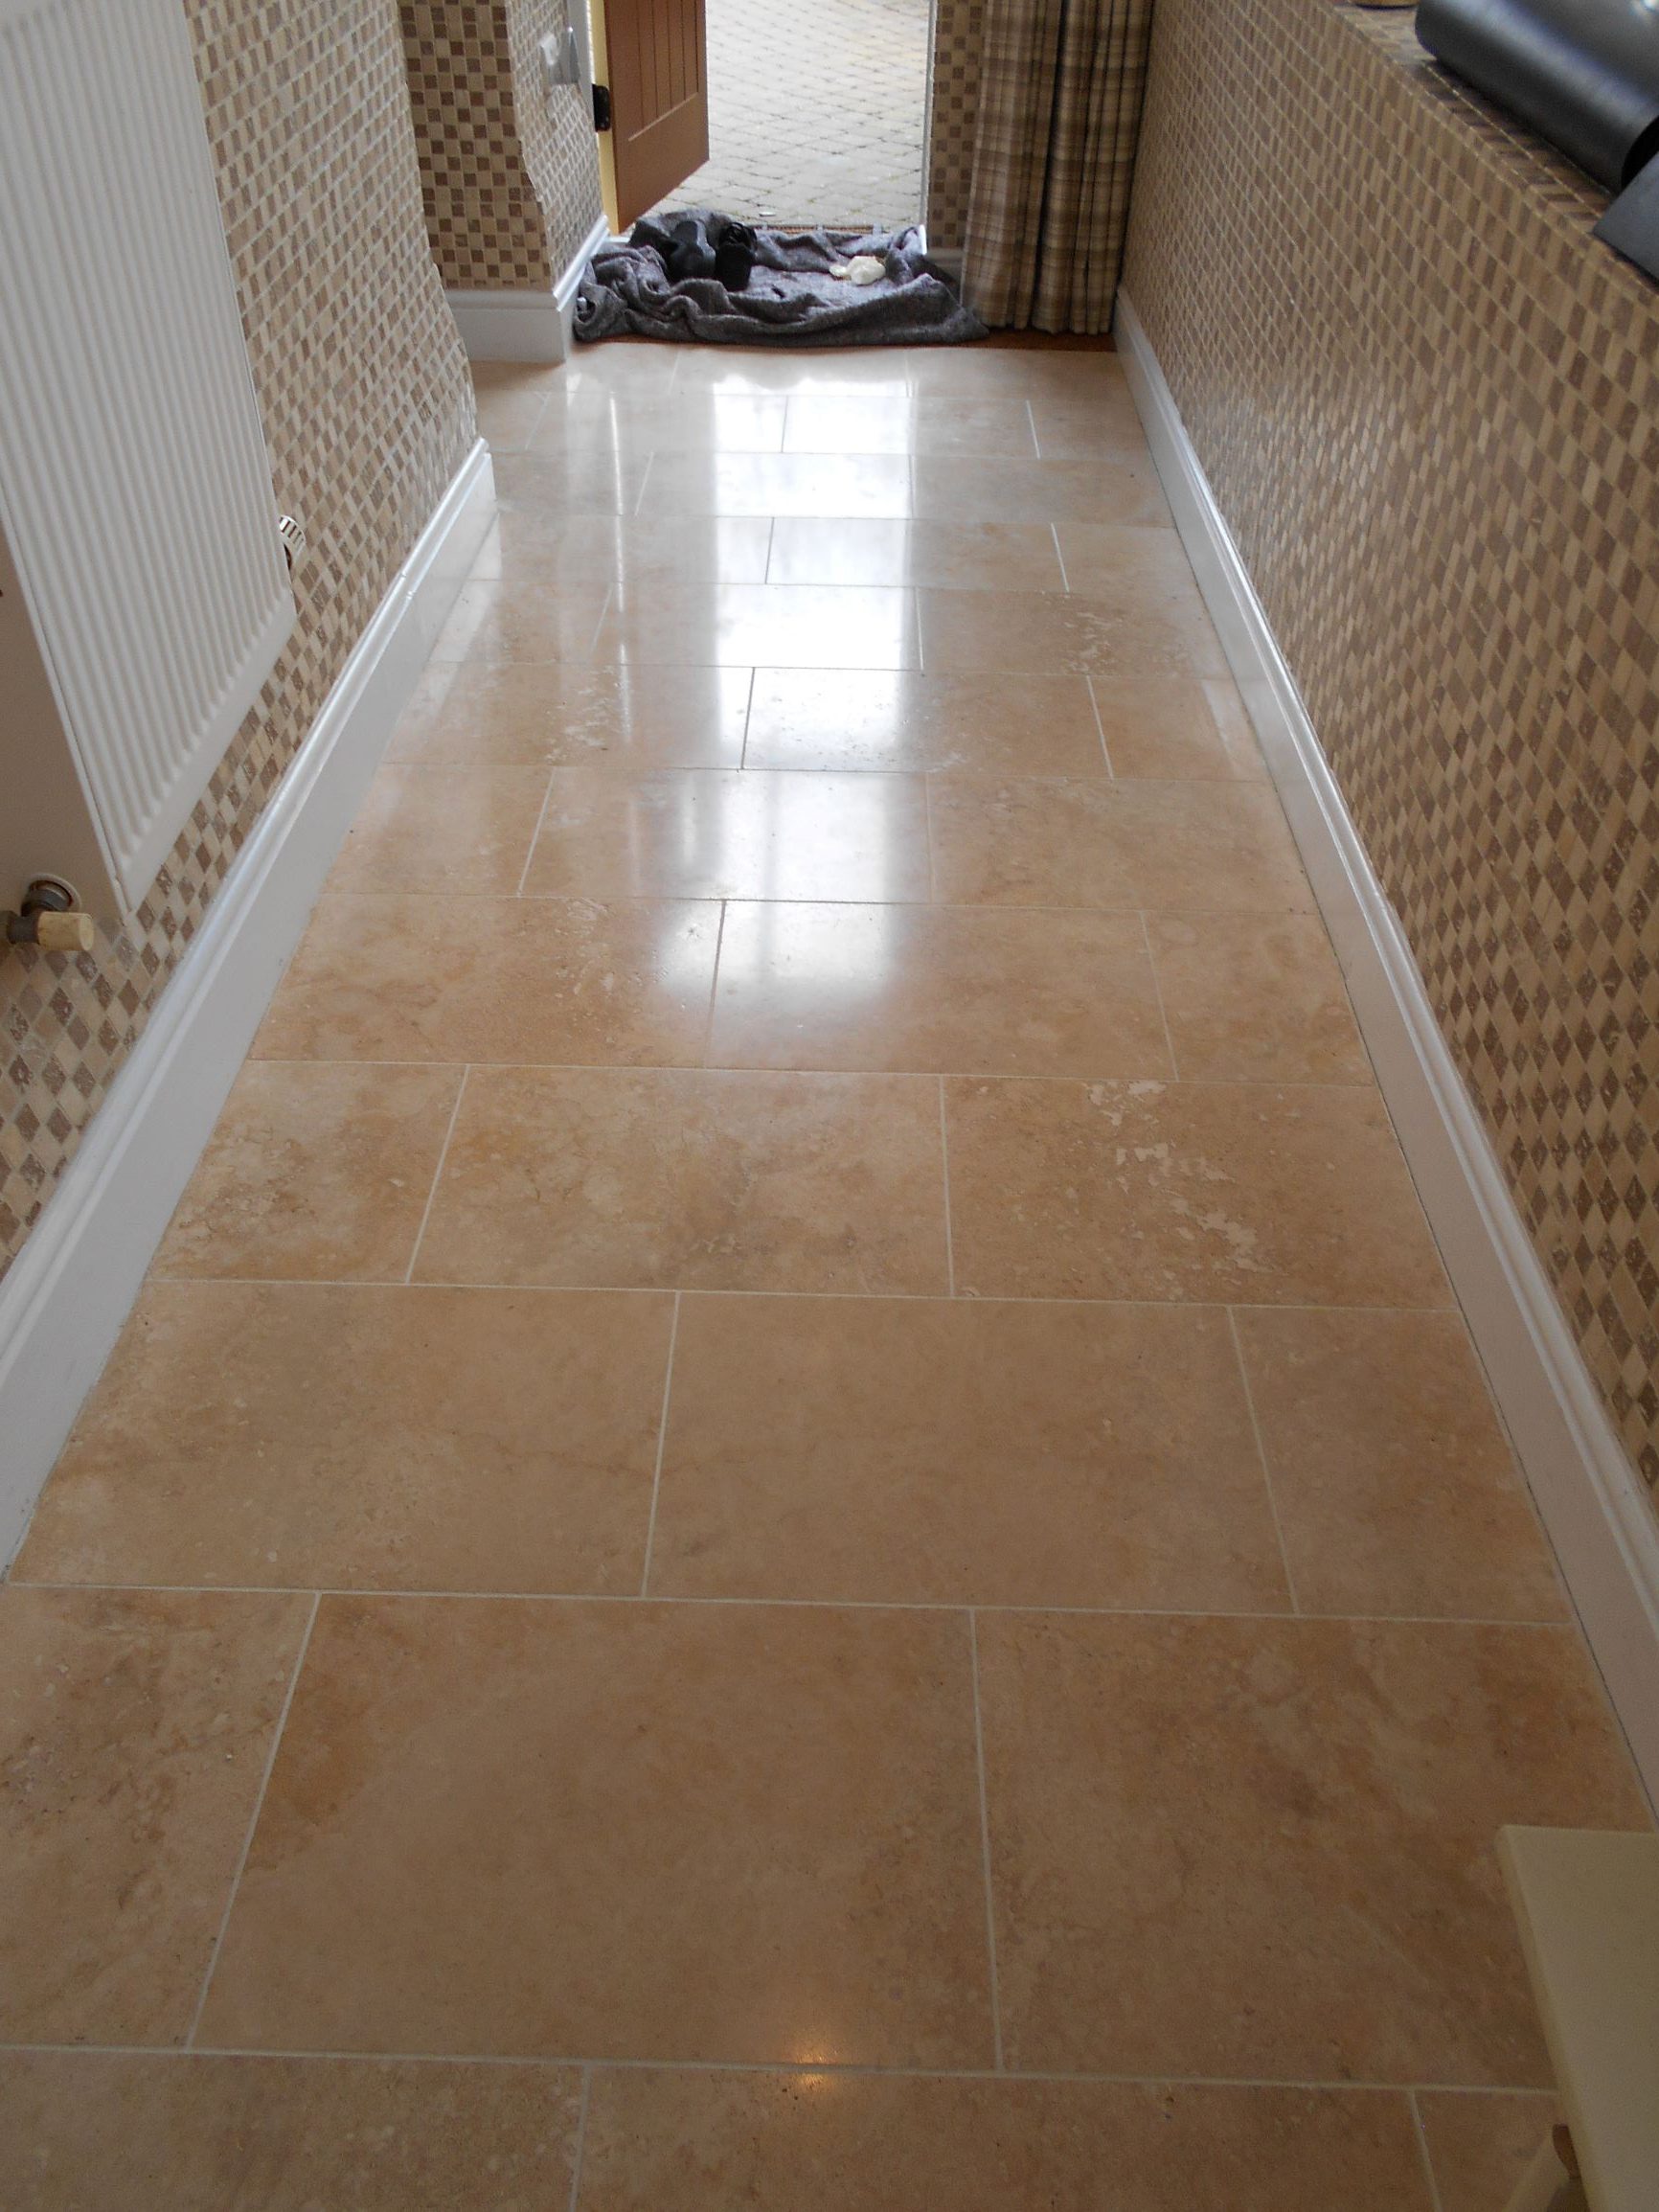 Travertine stone tiles polished and cleaned in Harpenden Hertfordshire